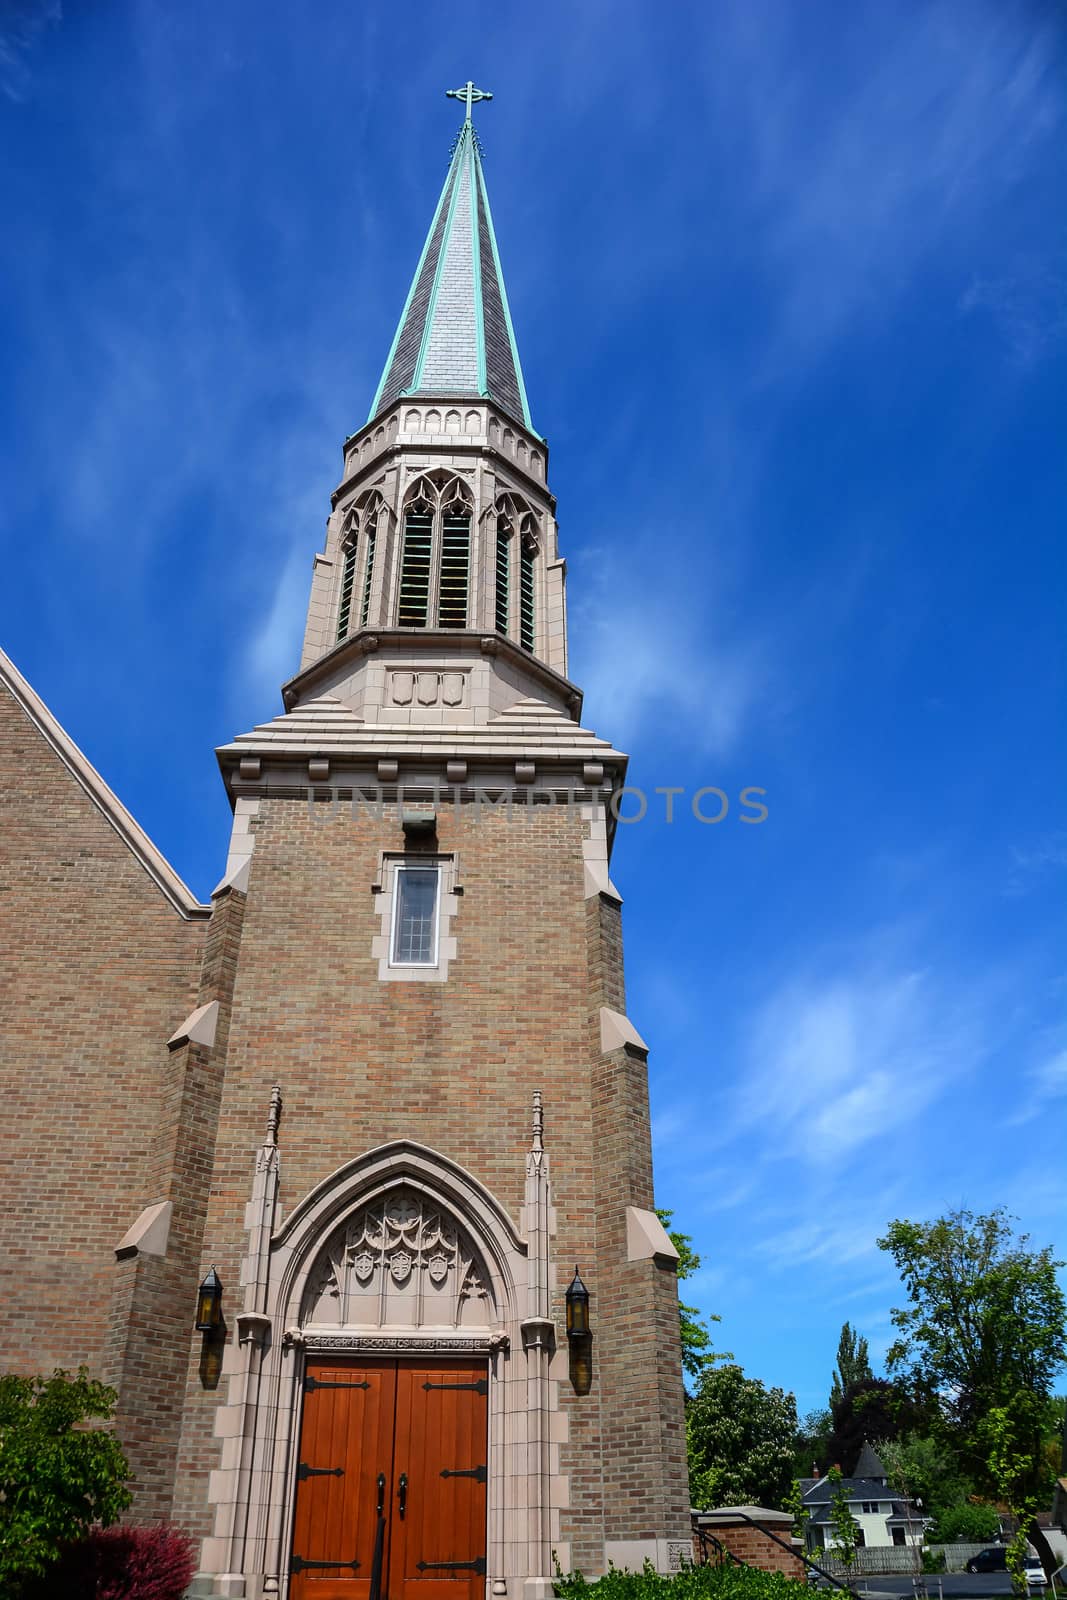 Gothic Church in Bellingham, WA with blue sky and wispy clouds